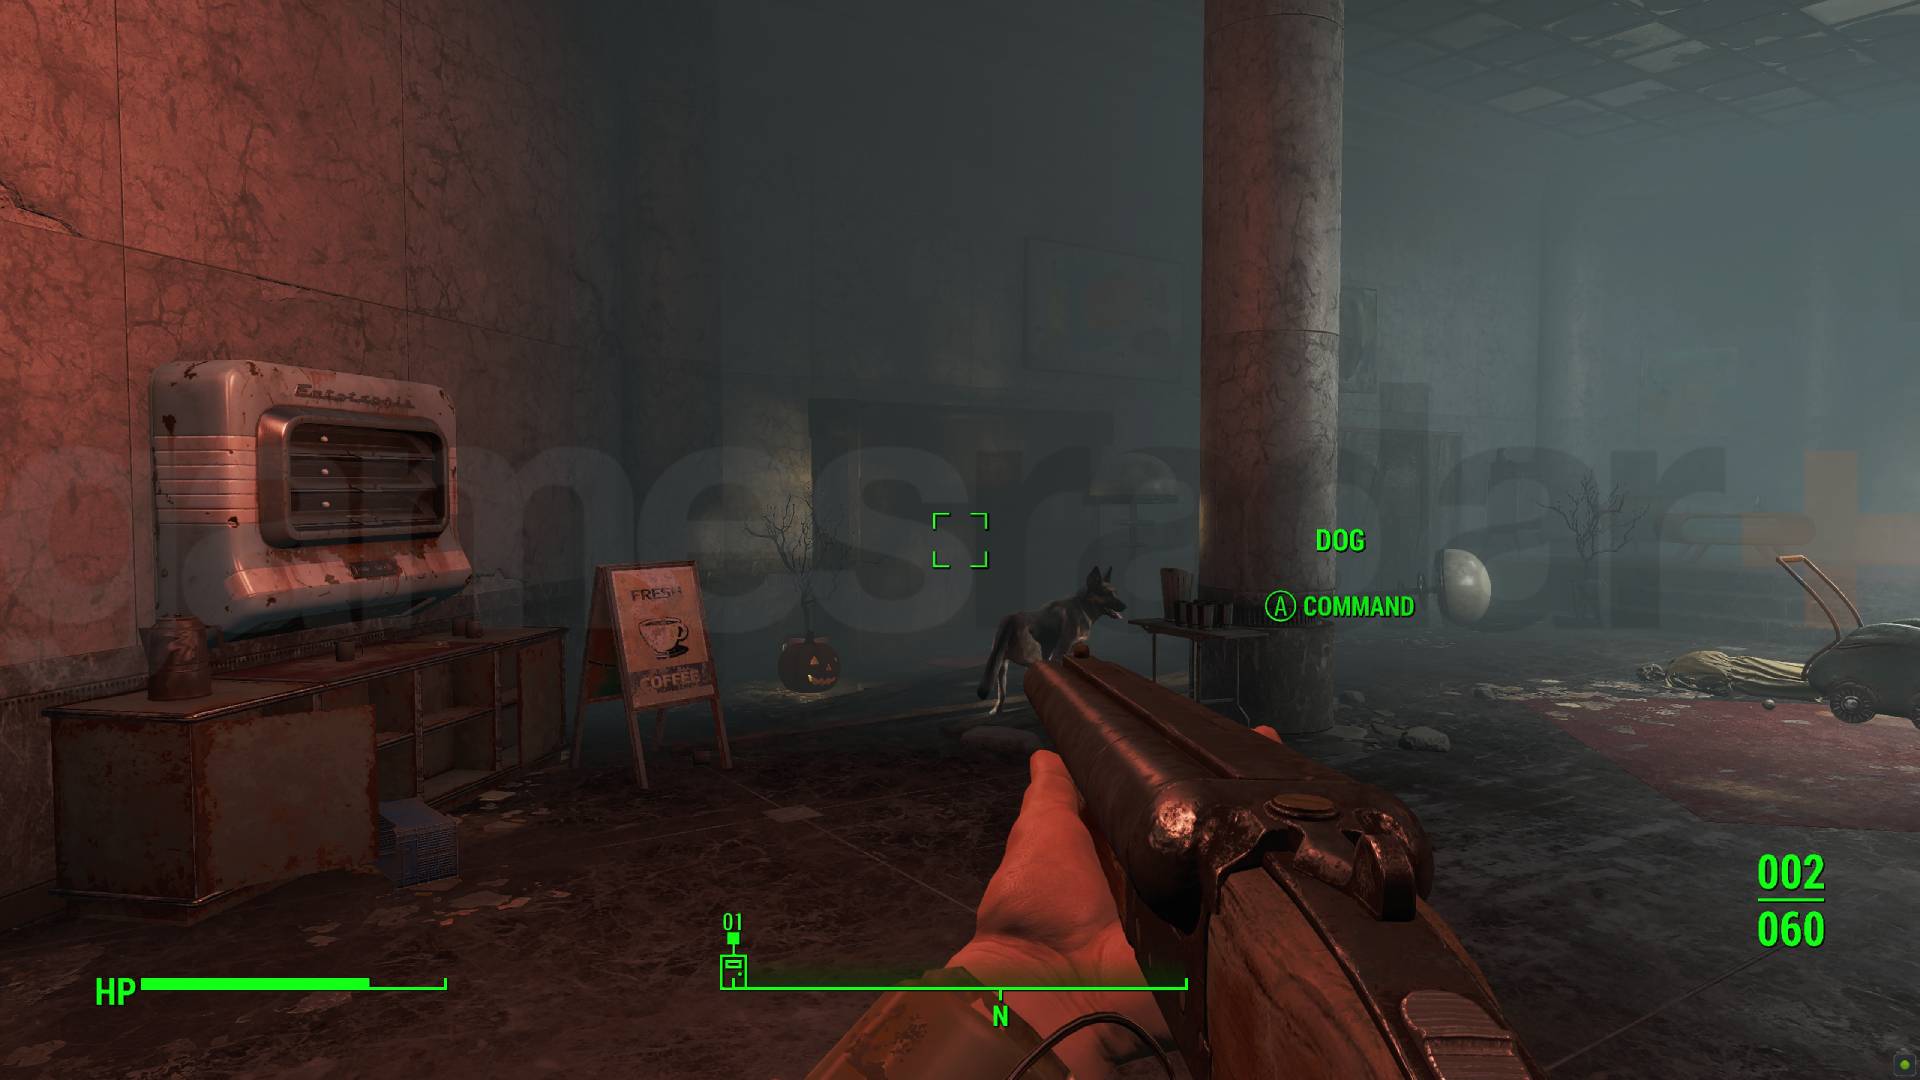 How to fix the Fallout 4 Mysterious Signal bug